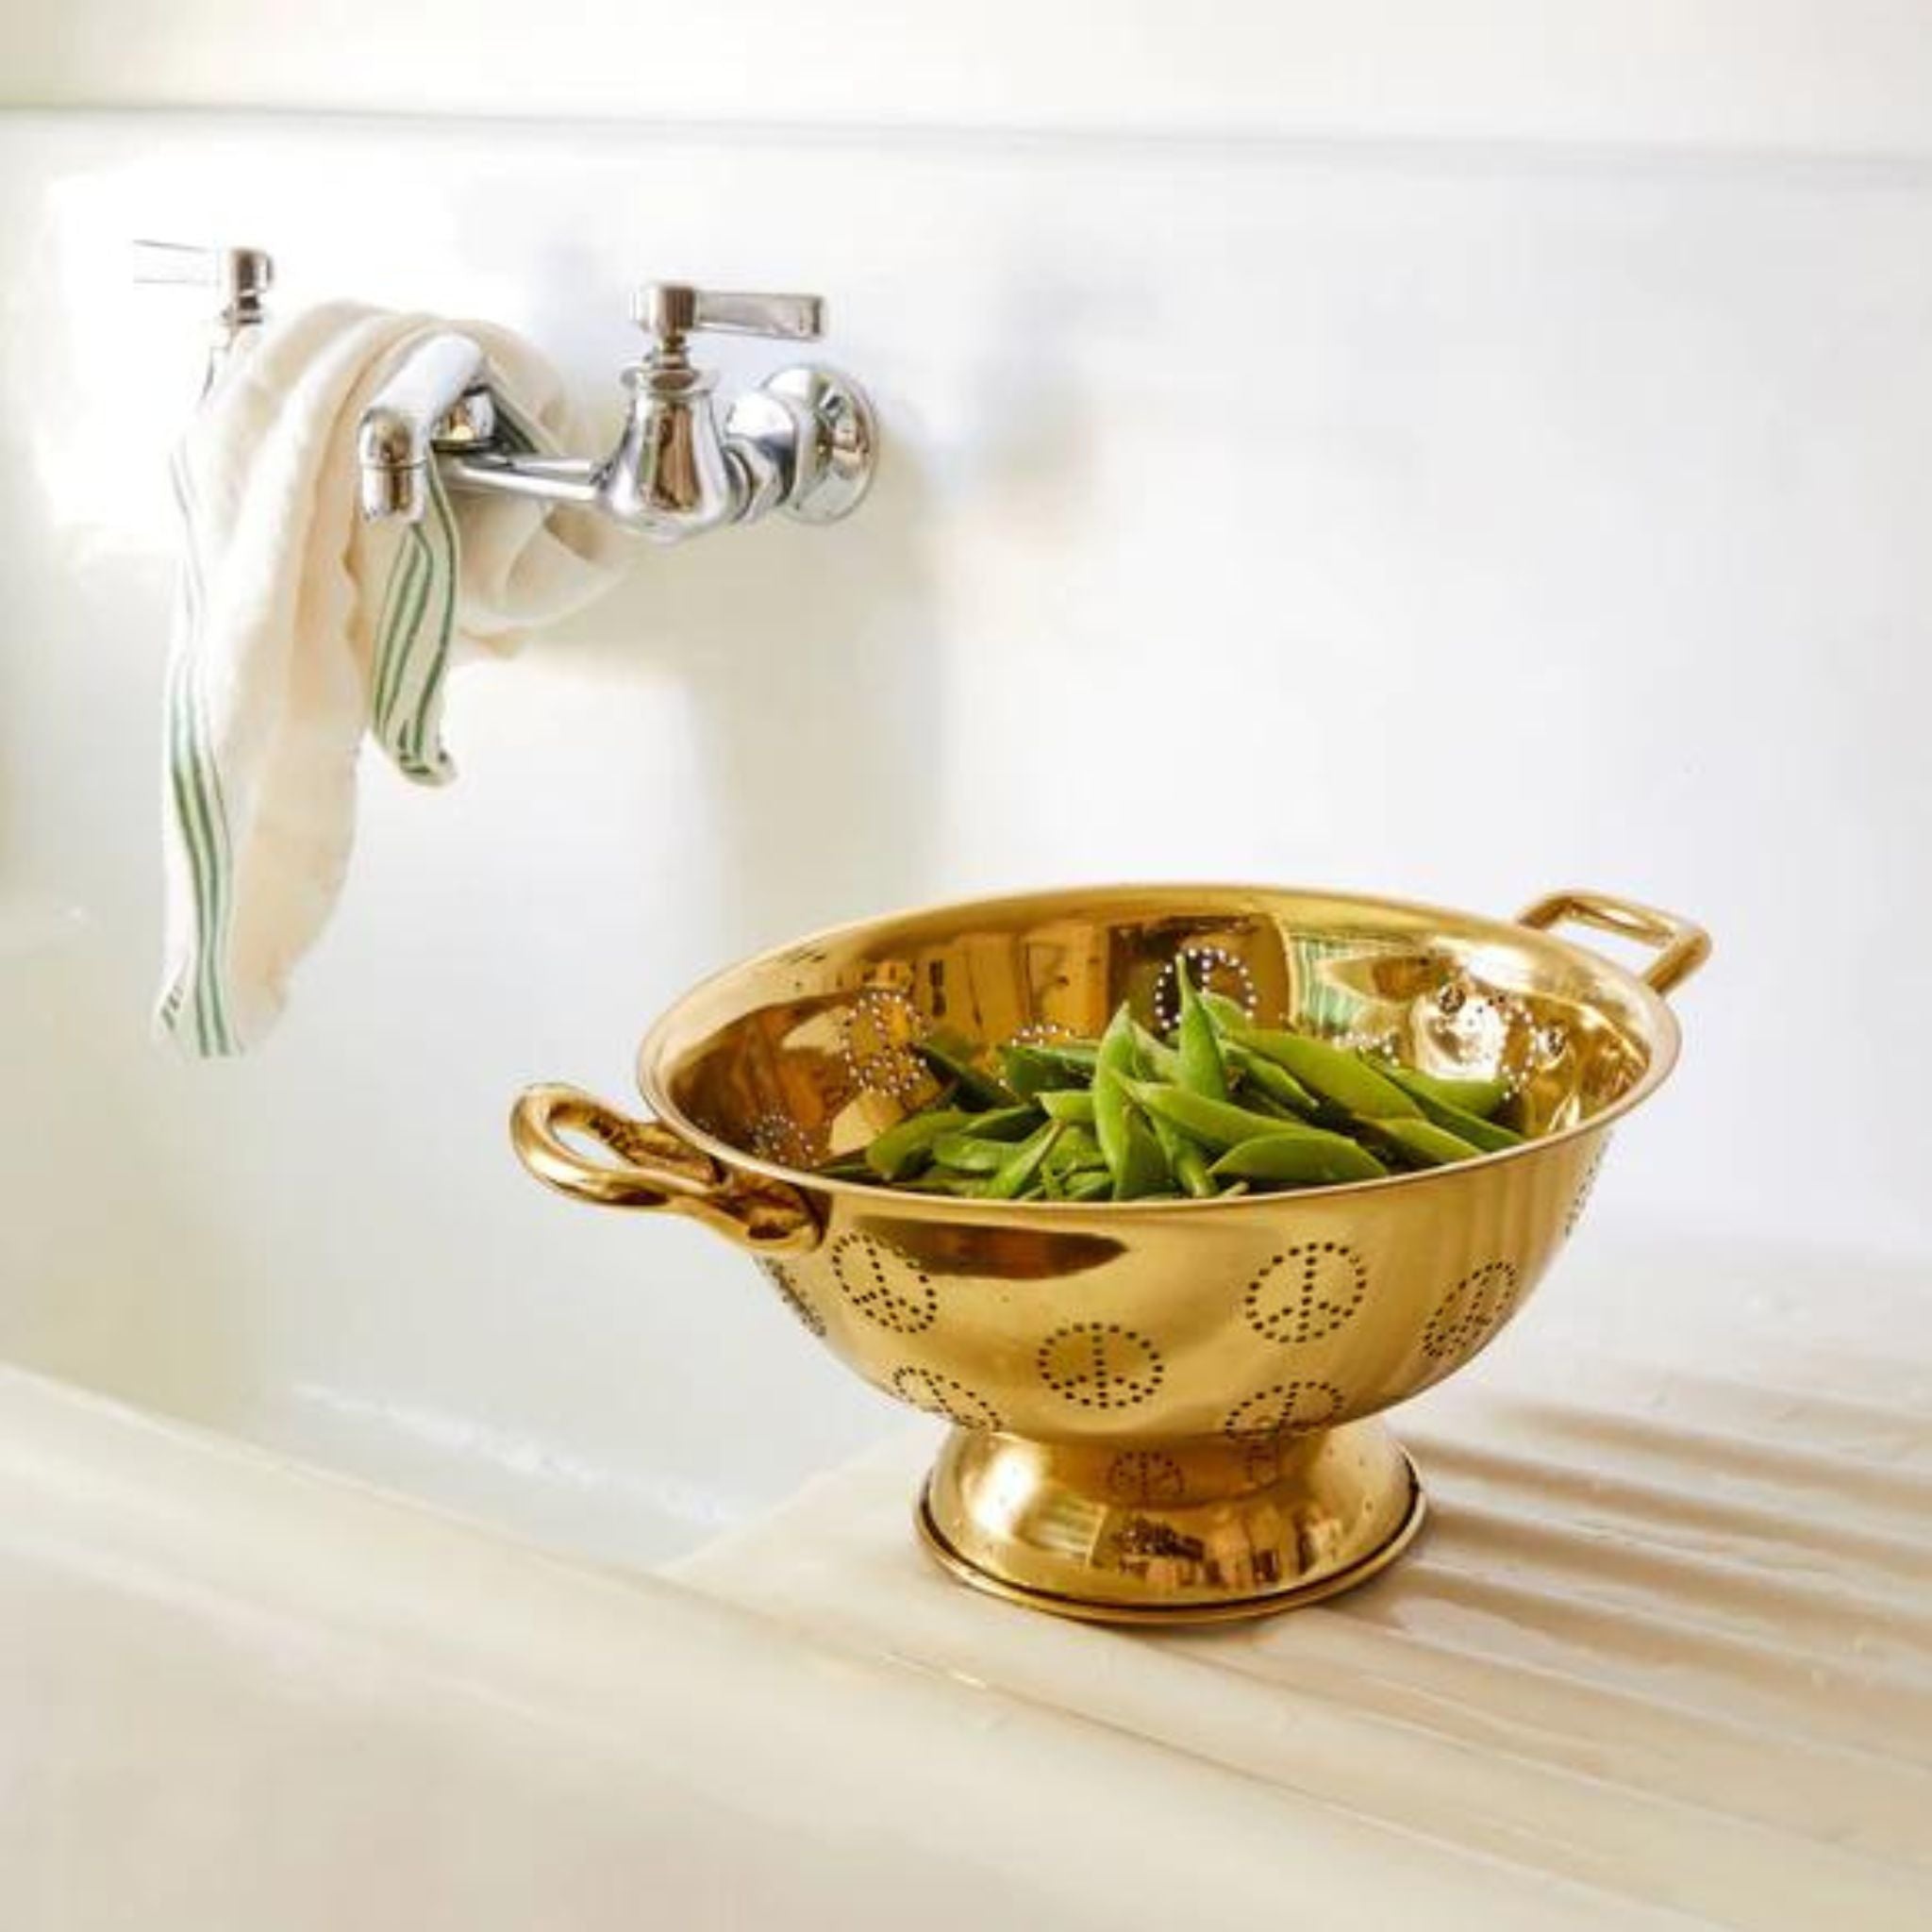 Simply Elevated - The Brass Peace Colander may be the most adorable sieve we've ever seen. Made from shiny solid brass and featuring little peace signs comprised of holes for liquids to seep through, the colander is sure to delight cooks and guests alike.